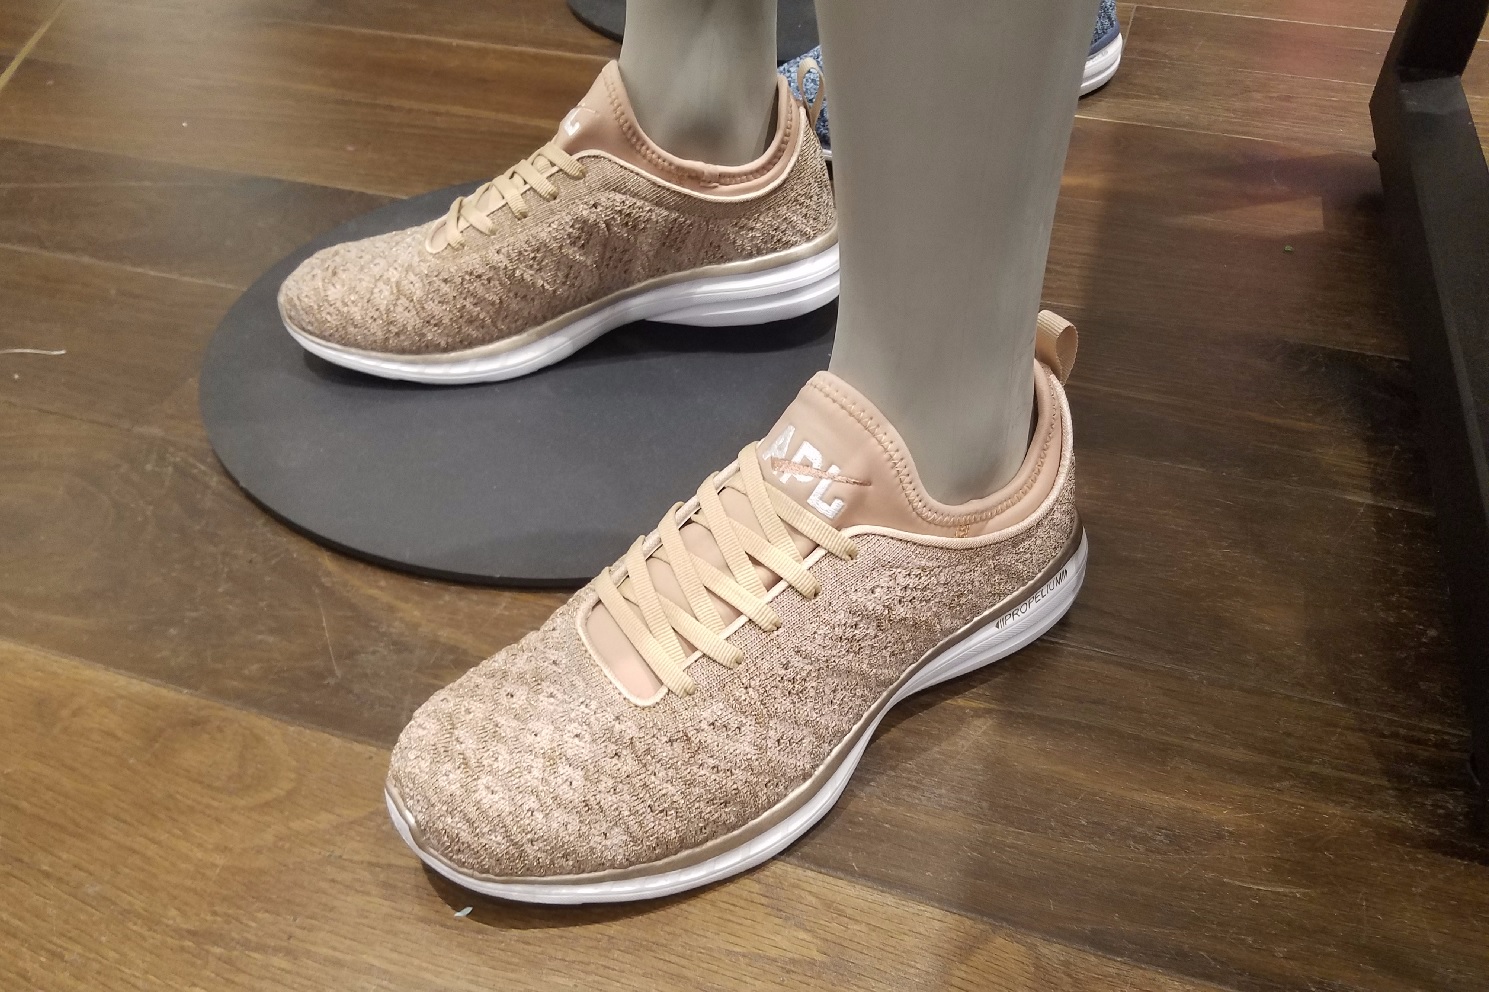 Lululemon Debuts APL Sneakers At Its Flagship Locations | SNOBETTE